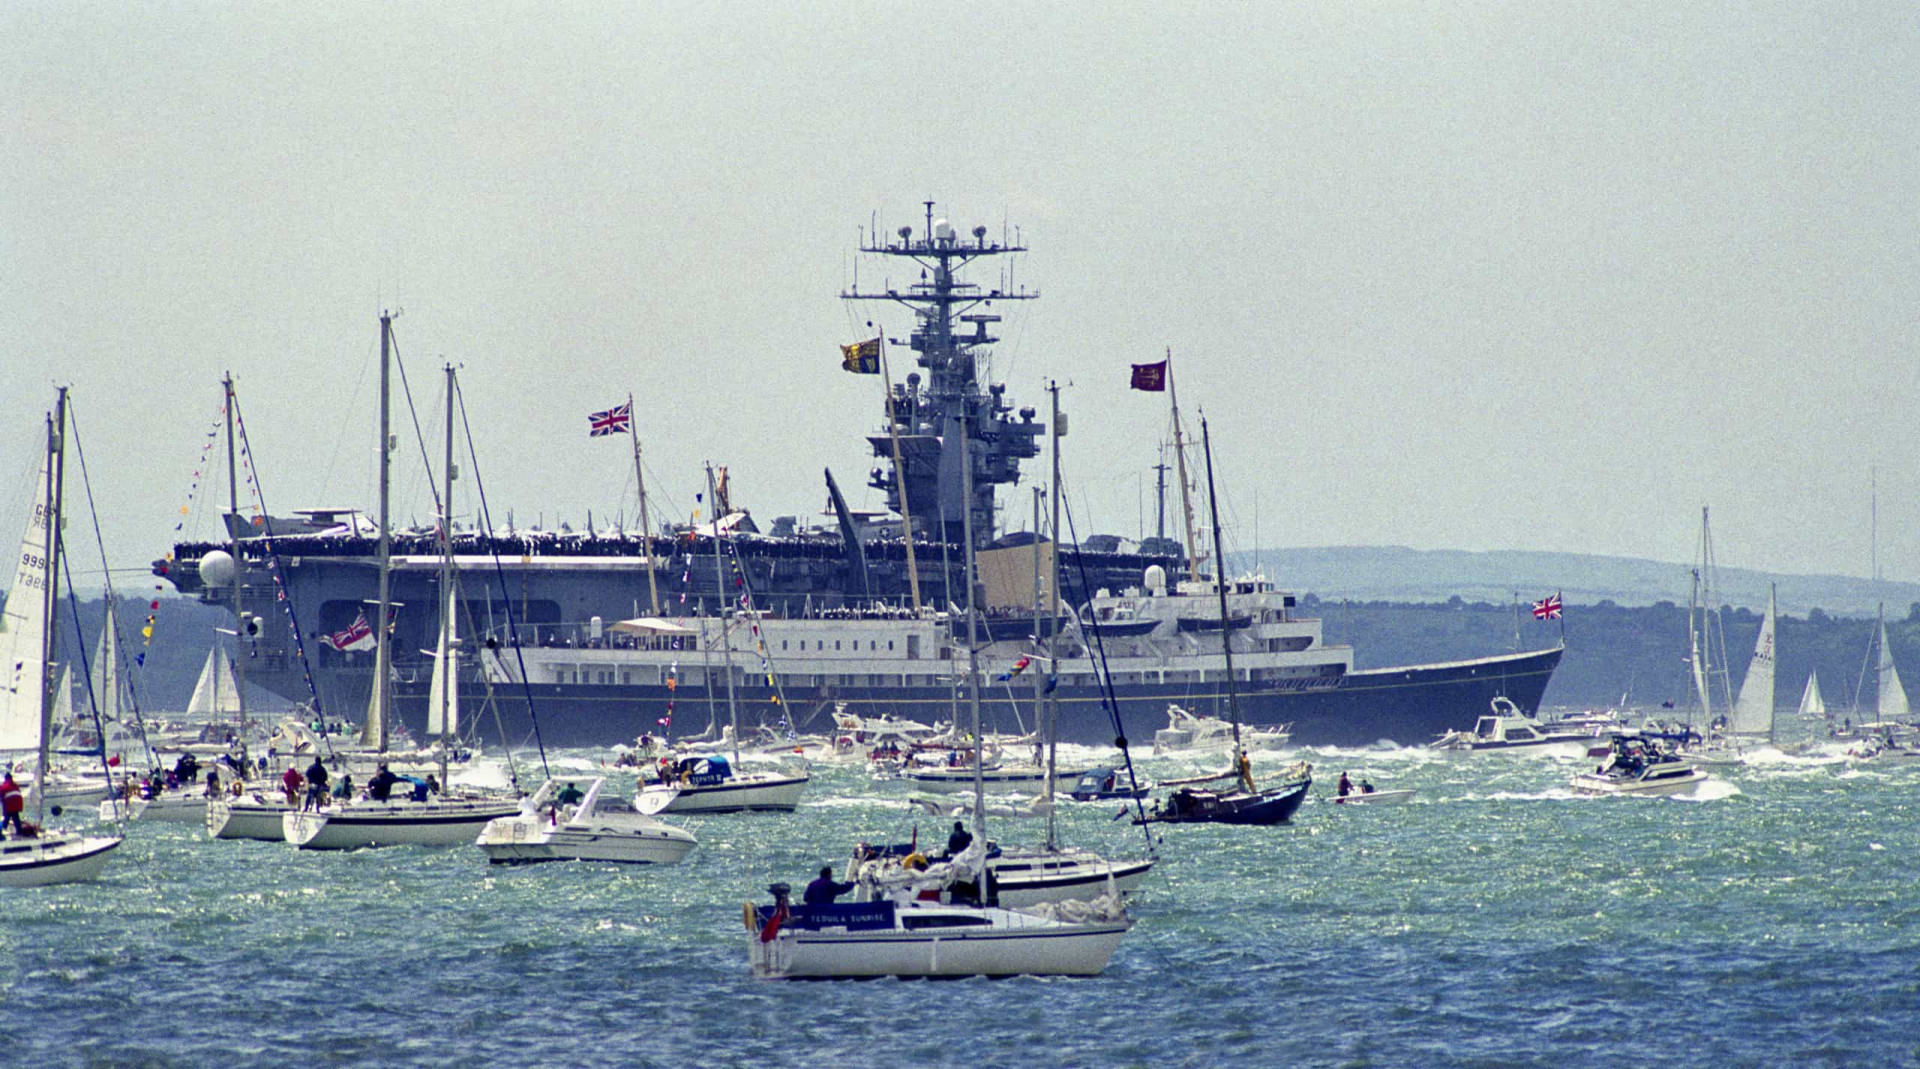 <p>June 6, 1994 marked the 50th anniversary of the D-Day landings in Normandy. To mark the historic occasion, <em>Britannia</em> and her royal passengers joined a colorful fleet review off Portsmouth and Gosport, in southern England.</p><p>You may also like:<a href="https://www.starsinsider.com/n/425531?utm_source=msn.com&utm_medium=display&utm_campaign=referral_description&utm_content=474709v3en-us"> Take the coronavirus quiz: Are you overreacting or being safe?</a></p>